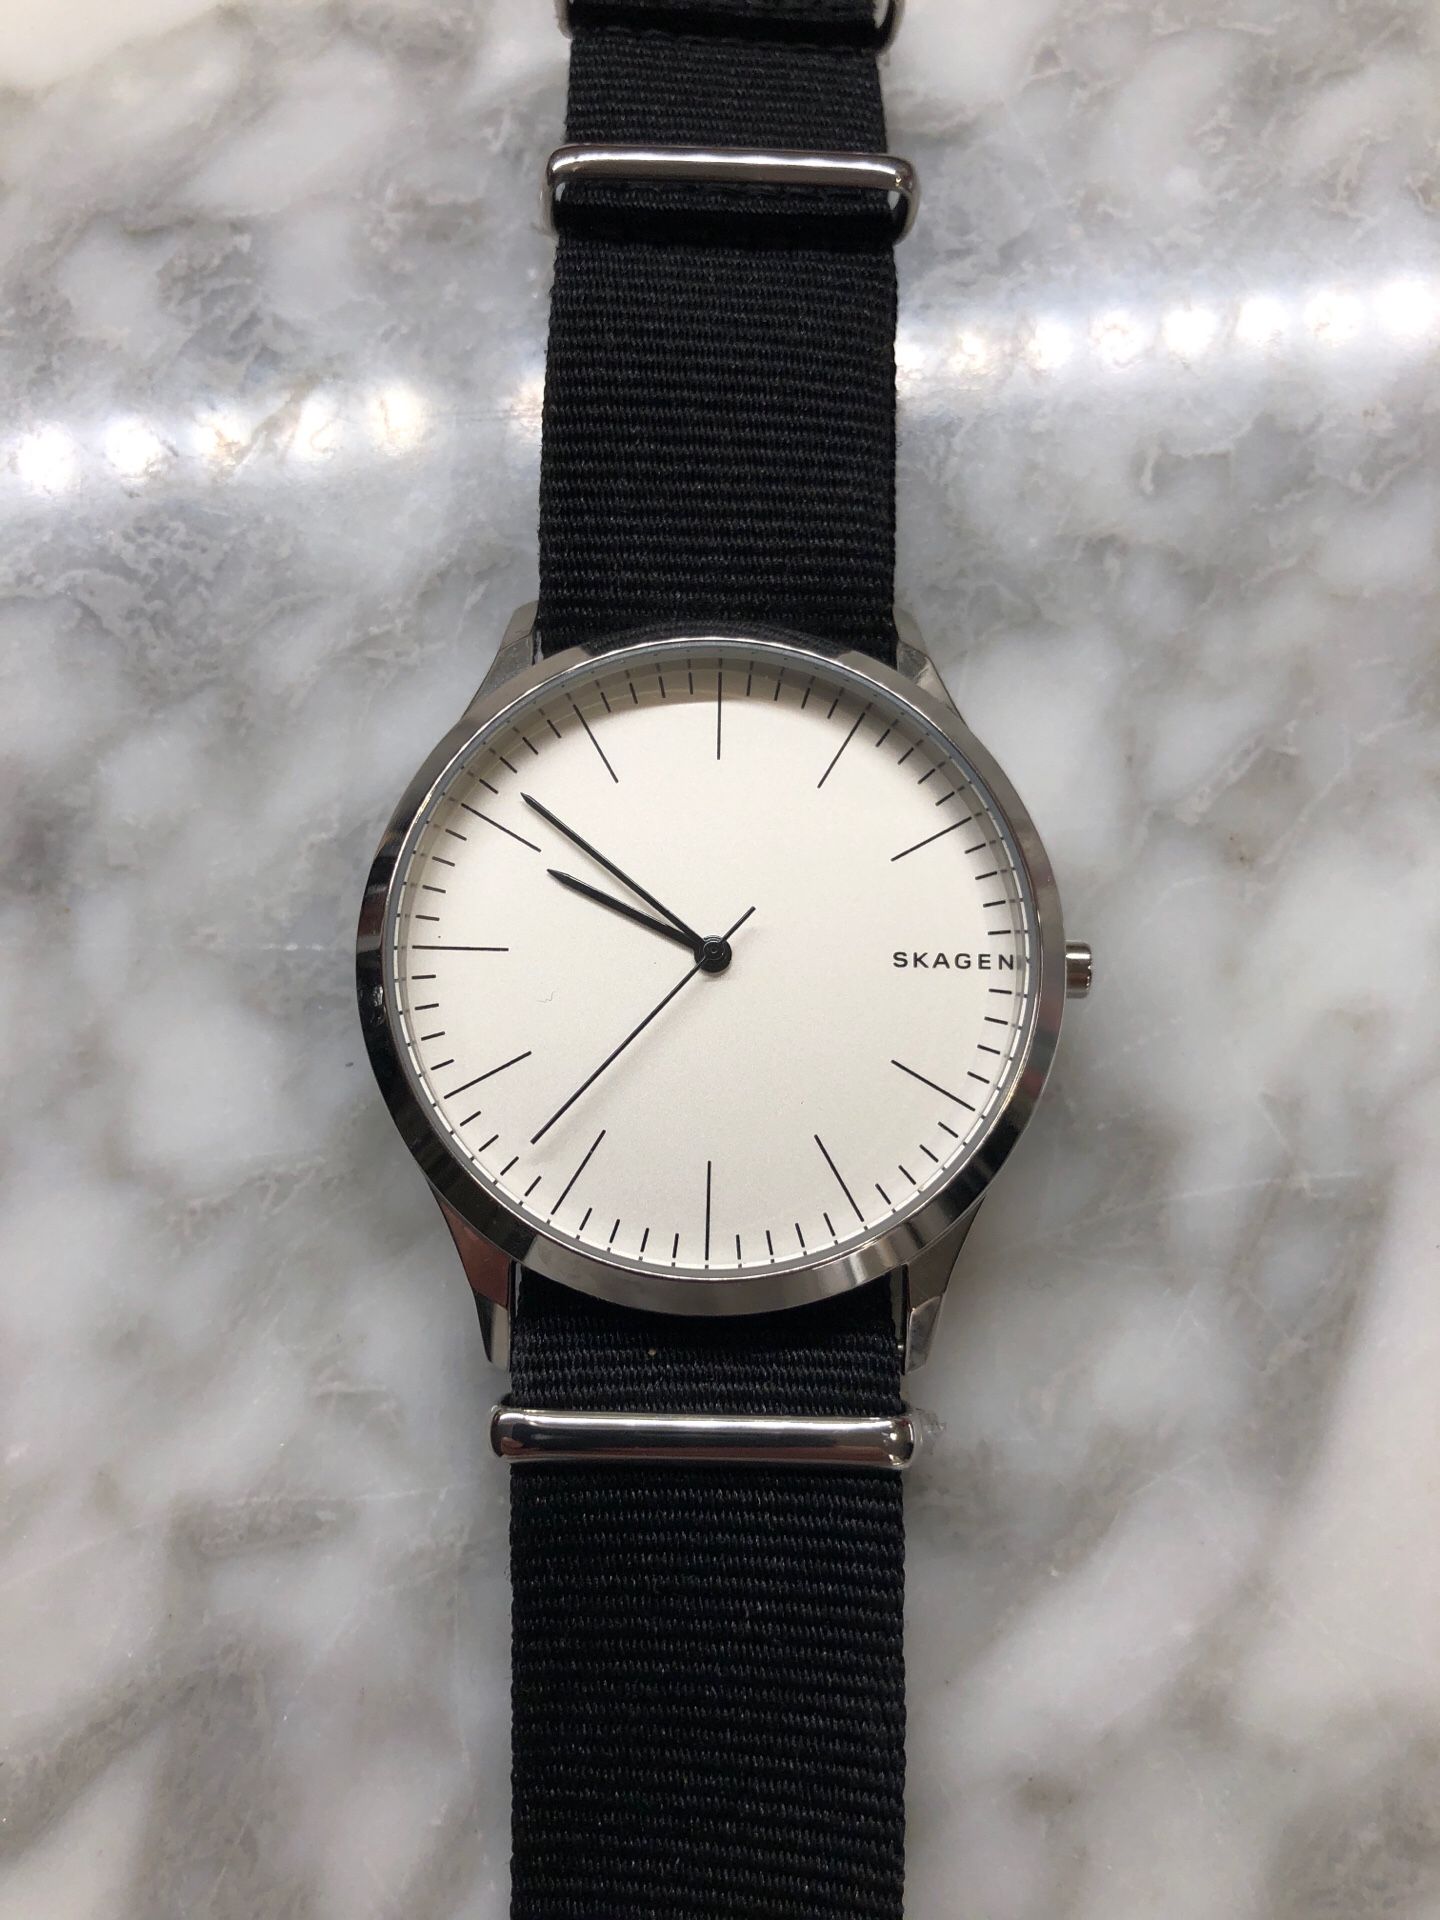 Skagen “Jorn” with nylon band (used)